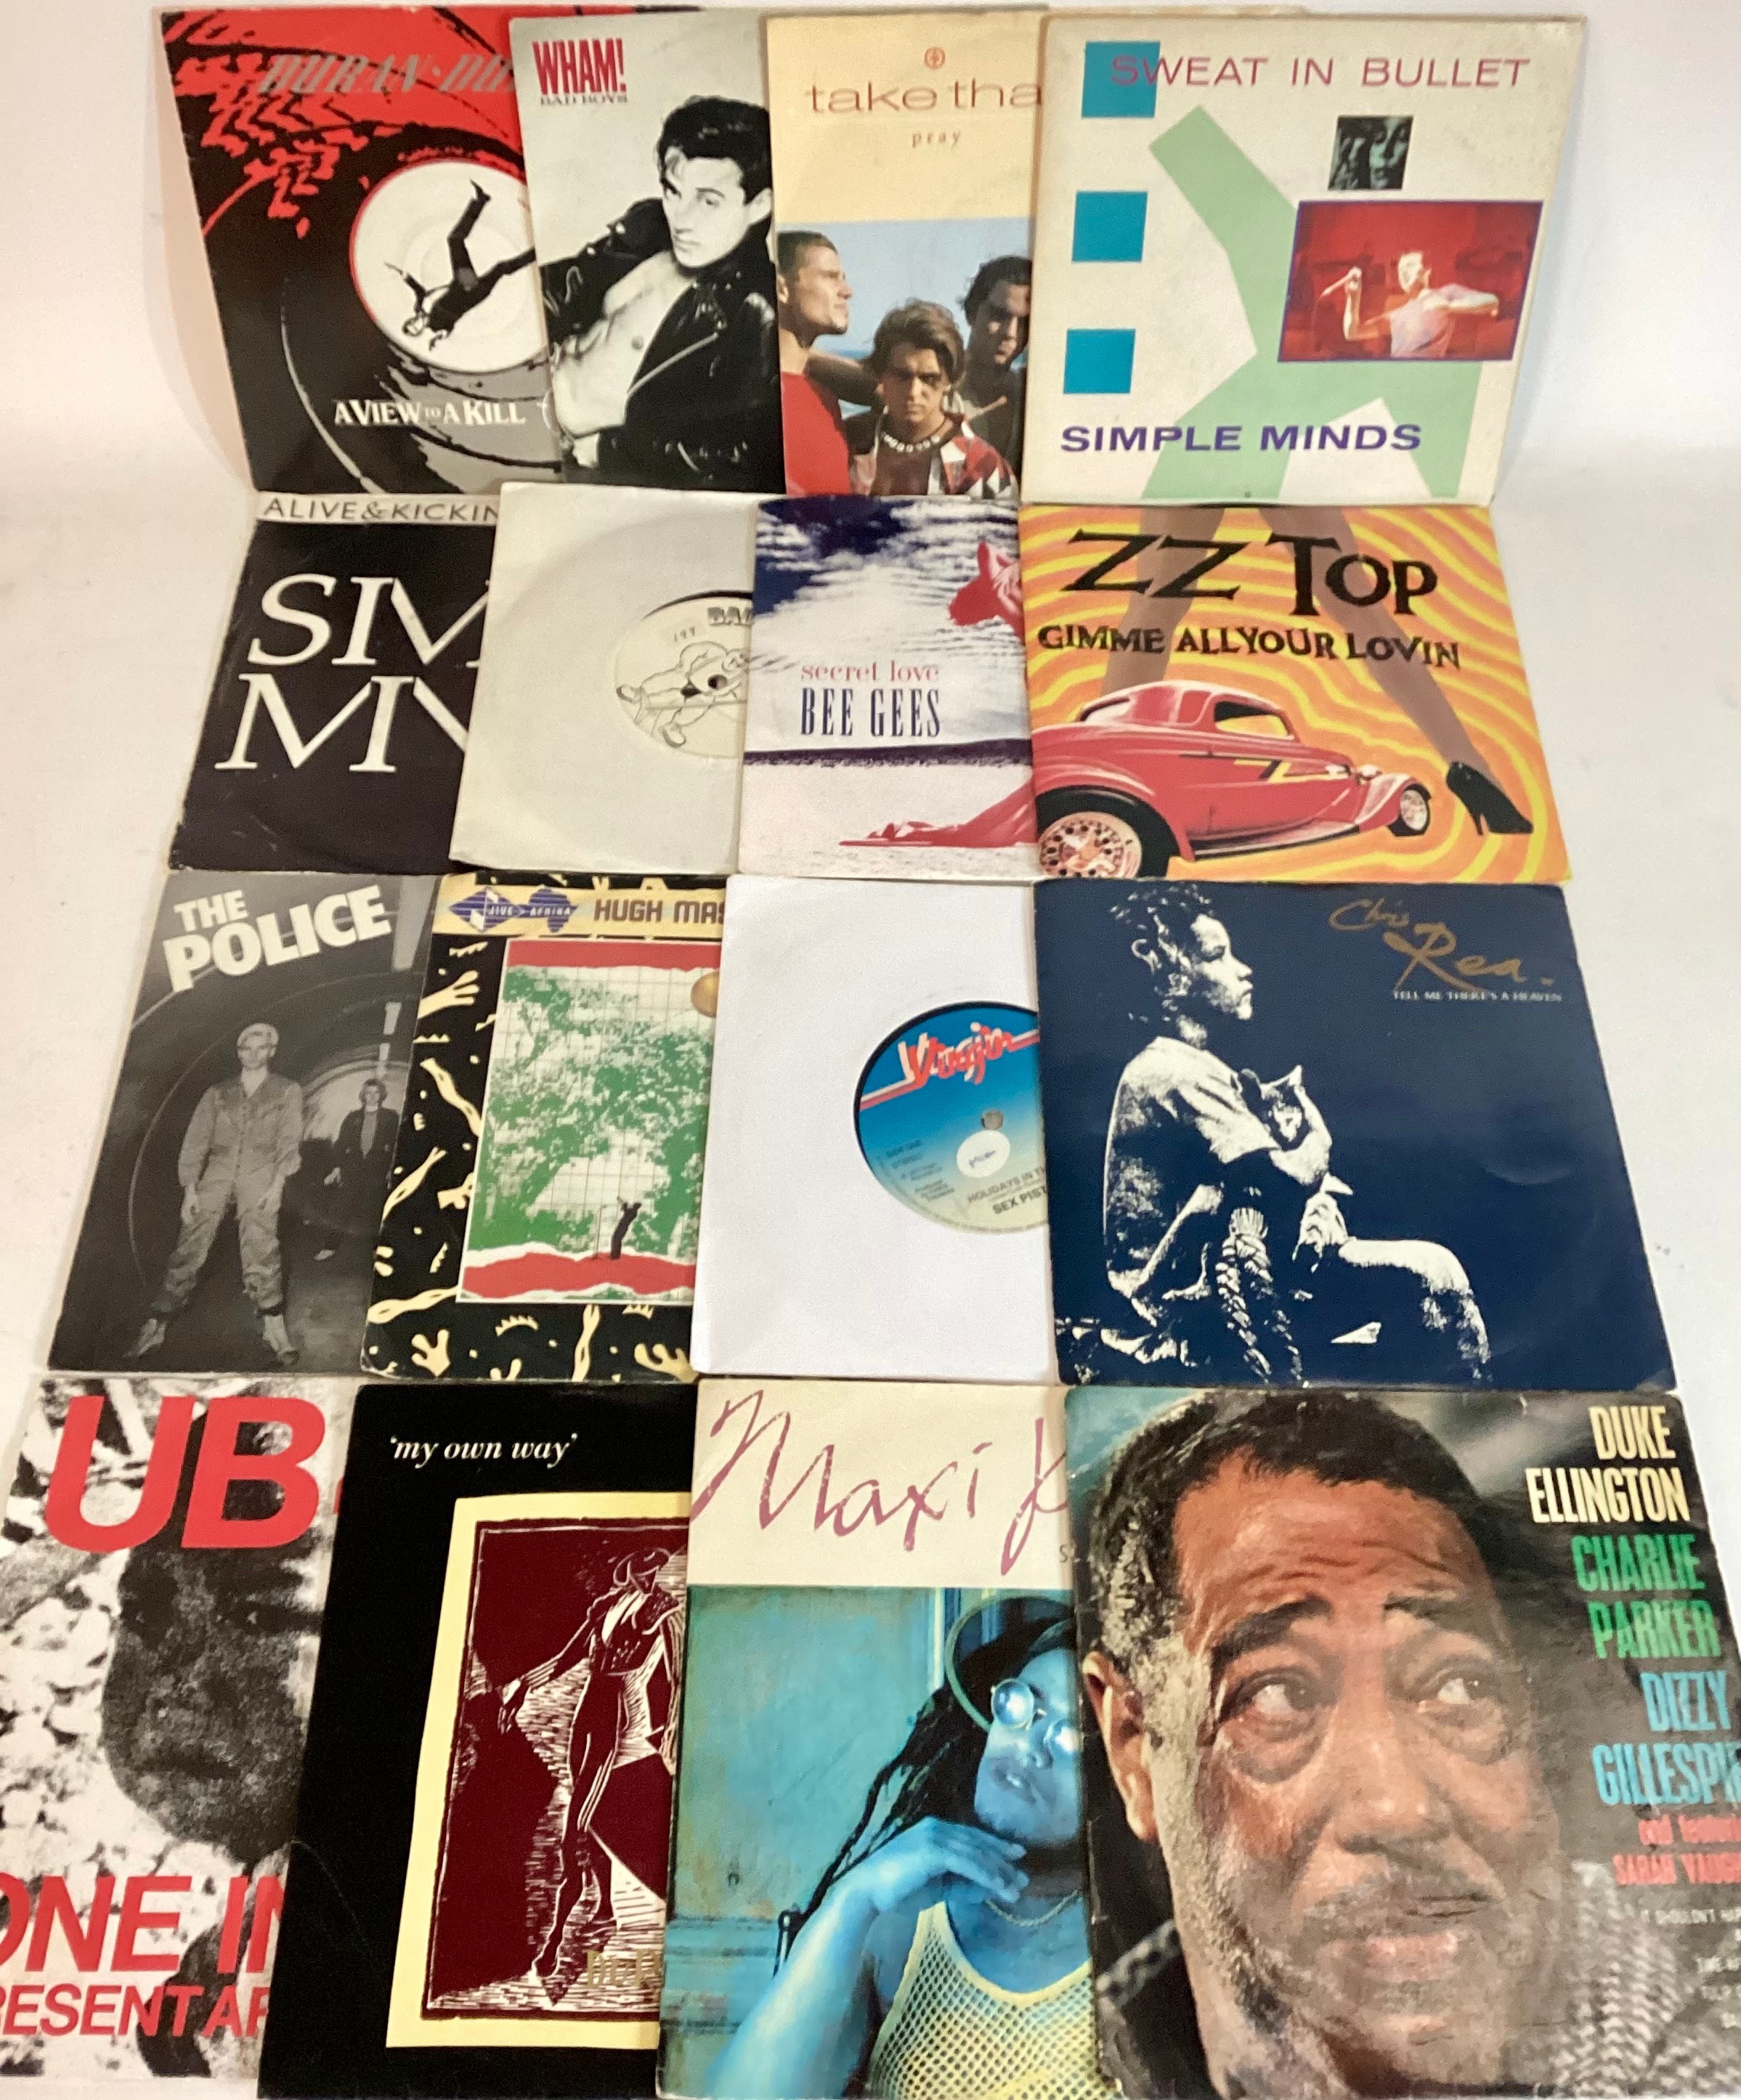 BOX OF VARIOUS 7” VINYL 45RPM SINGLES. Various hits from various artists and groups to include - Sex - Image 2 of 2